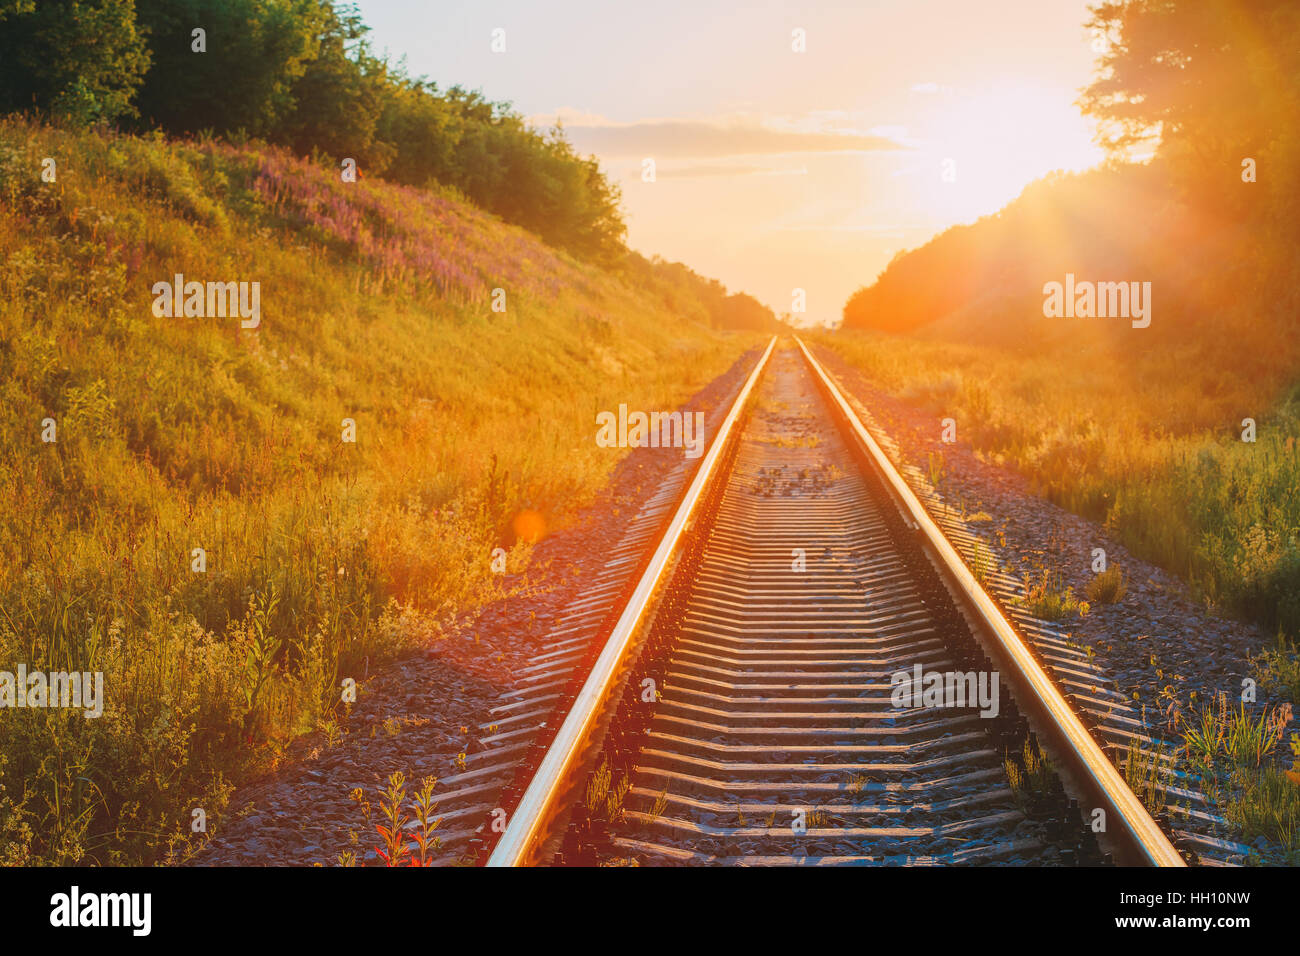 The Scenic Landscape With Railway Going Straight Ahead Through Summer Hilly Meadow To Sunset Or Sunrise In Sunlight. Lense Flare Effect. Stock Photo